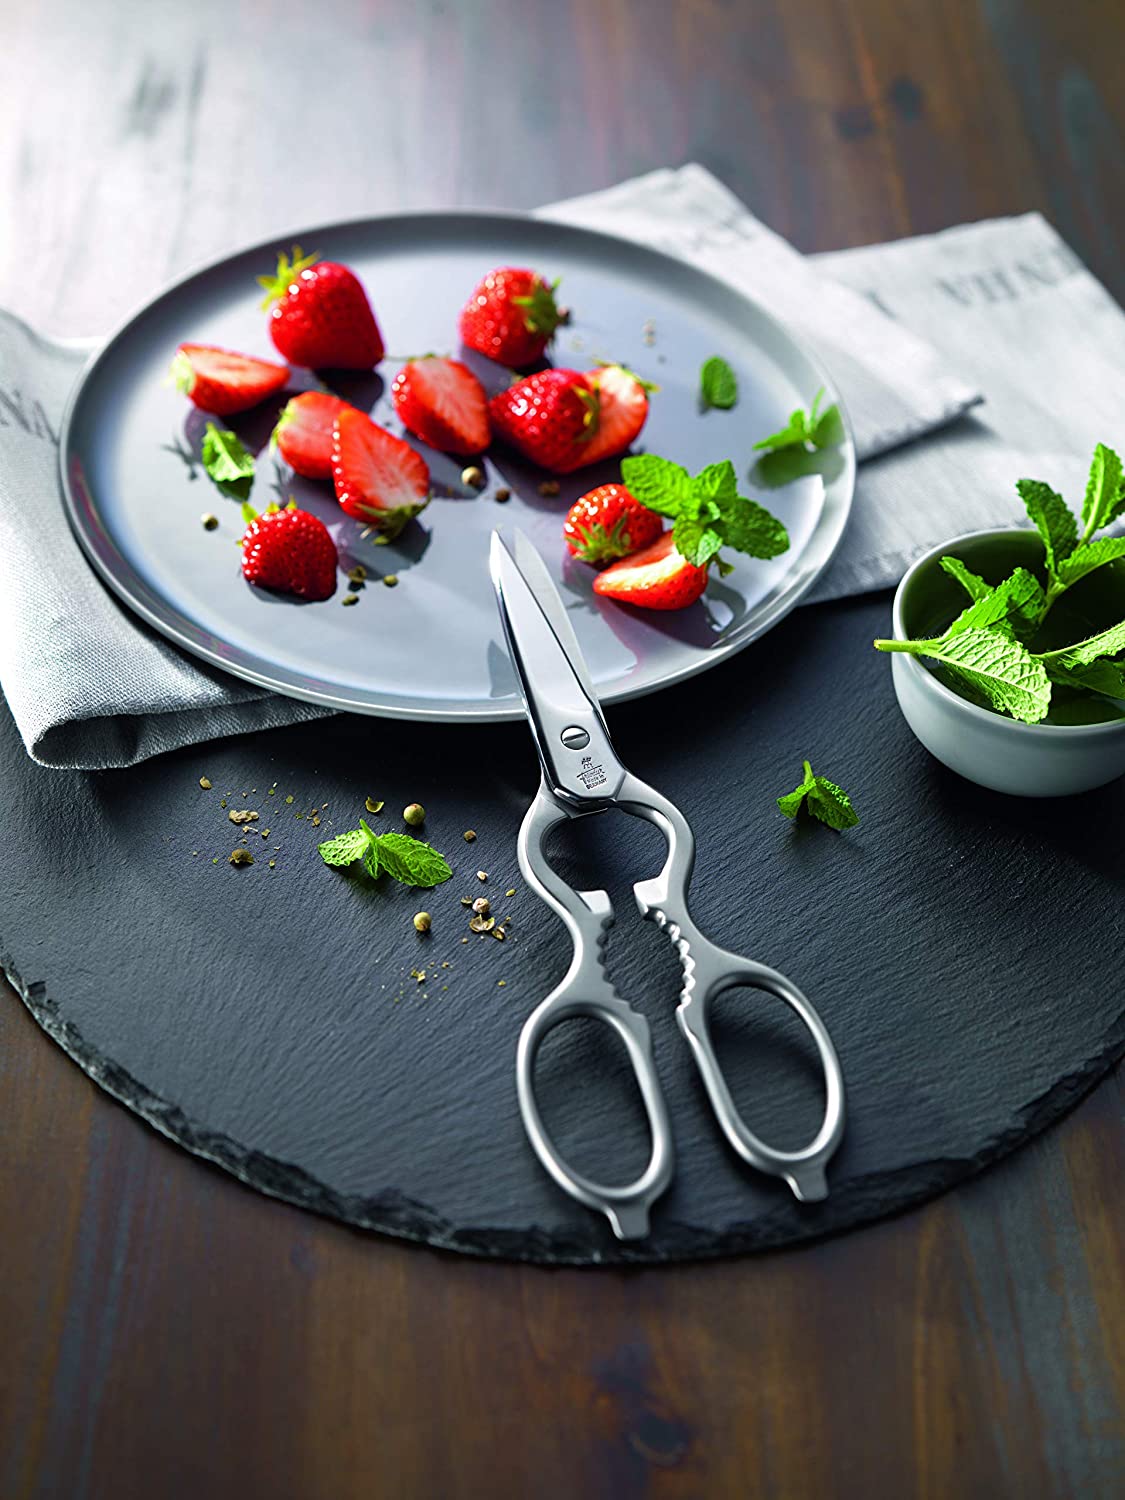 ZWILLING Multi-purpose Shears - 439232000 - The Cotswold Knife Company